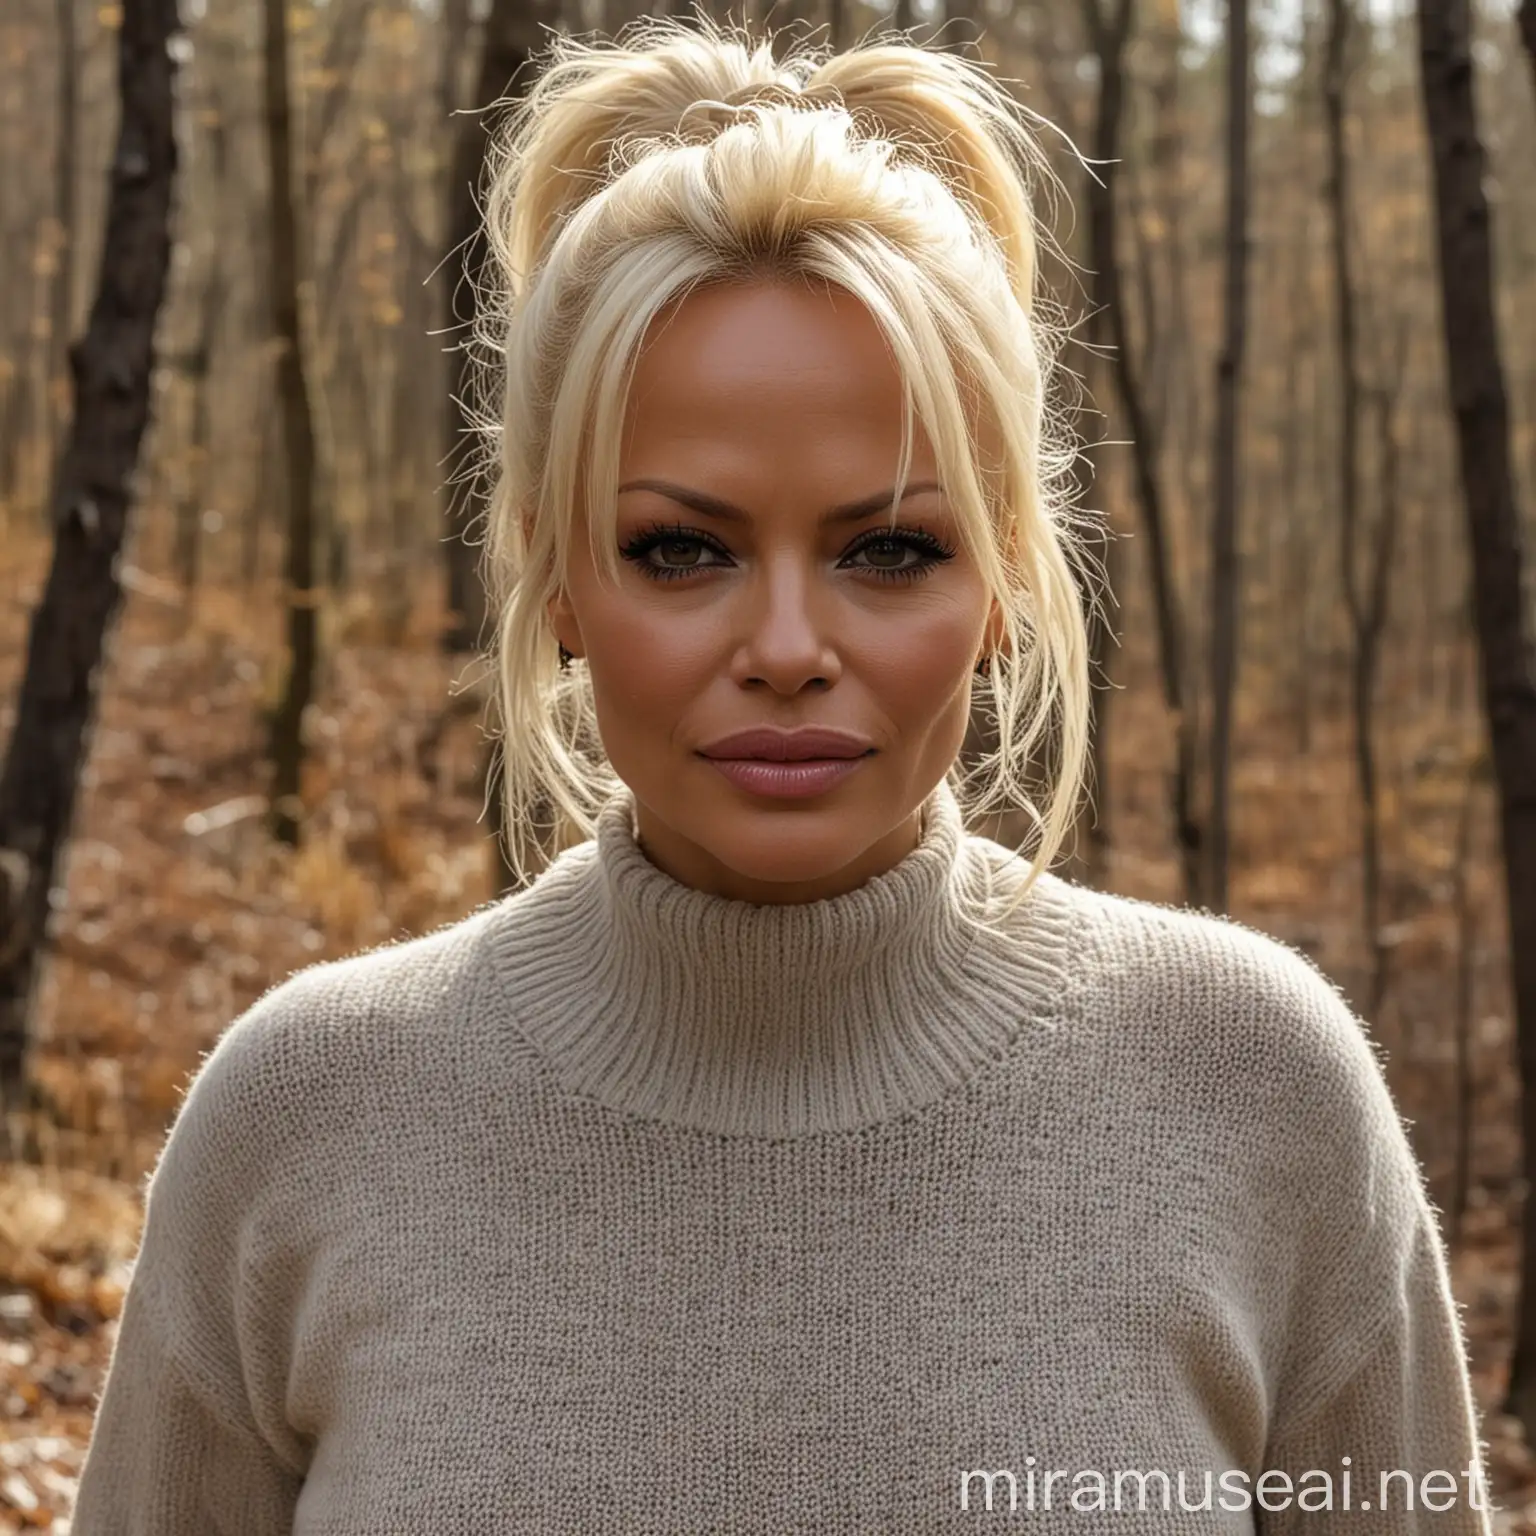 Pamela Anderson Hiking in the Woods Stylish Outdoor Adventure